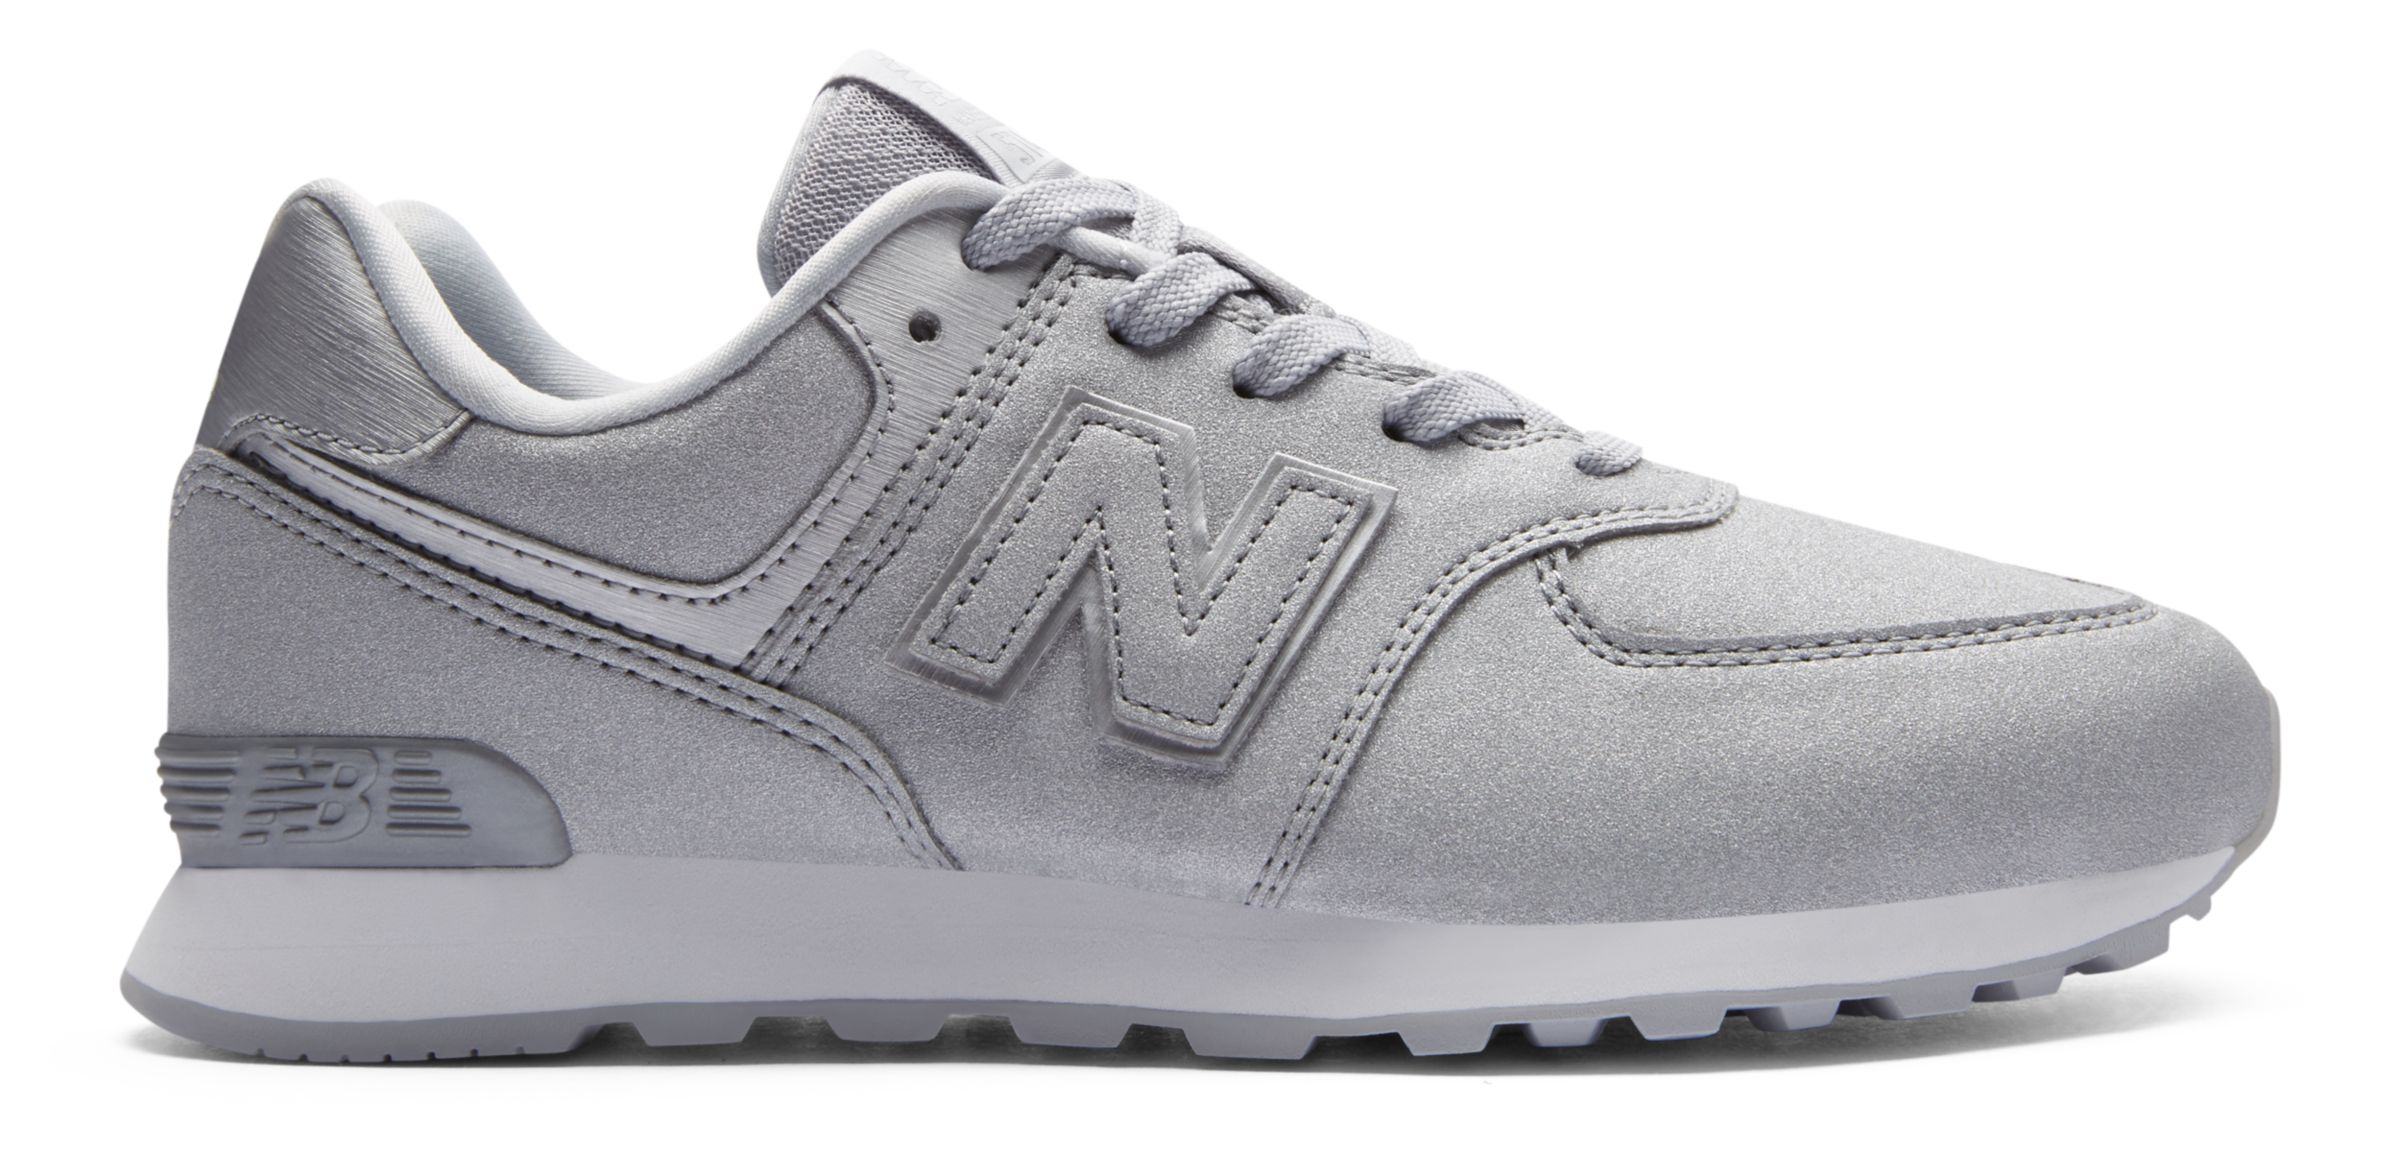 New Balance GC574-GDG on Sale - Discounts Up to 53% Off on GC574KS at Joe's New  Balance Outlet